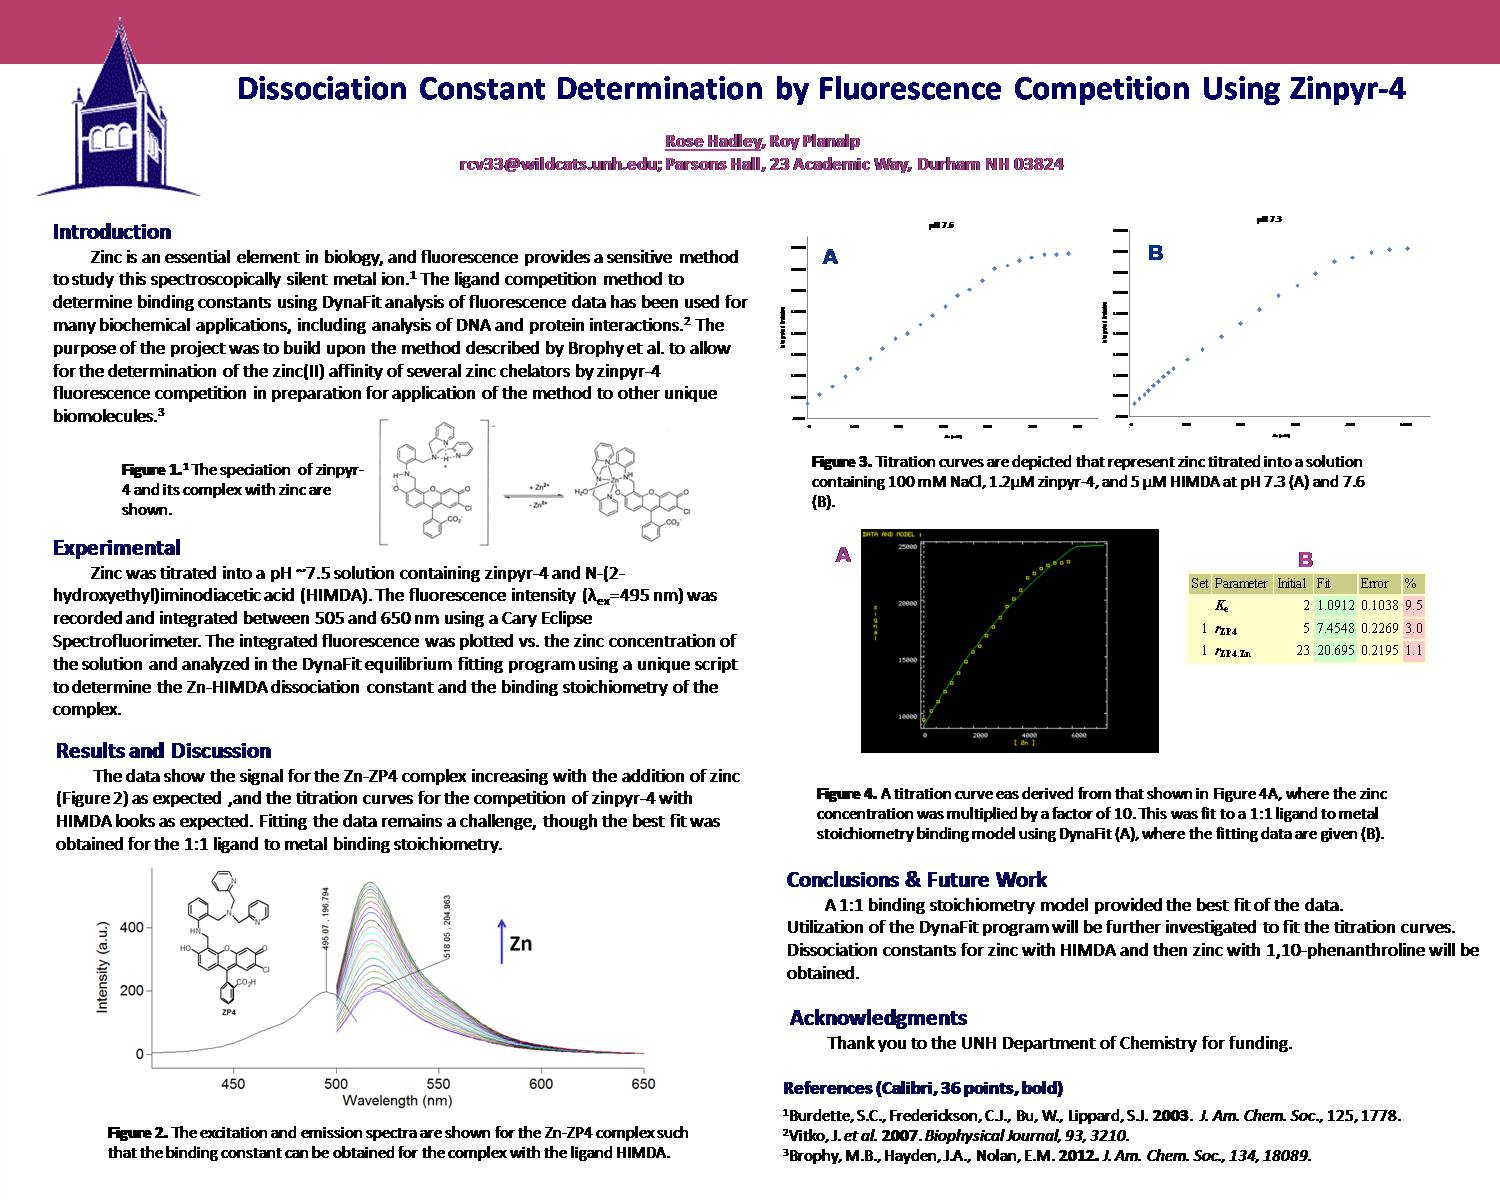 Dissociation Constant Determination By Fluorescence Competition Using Zinpyr-4 by rcv33